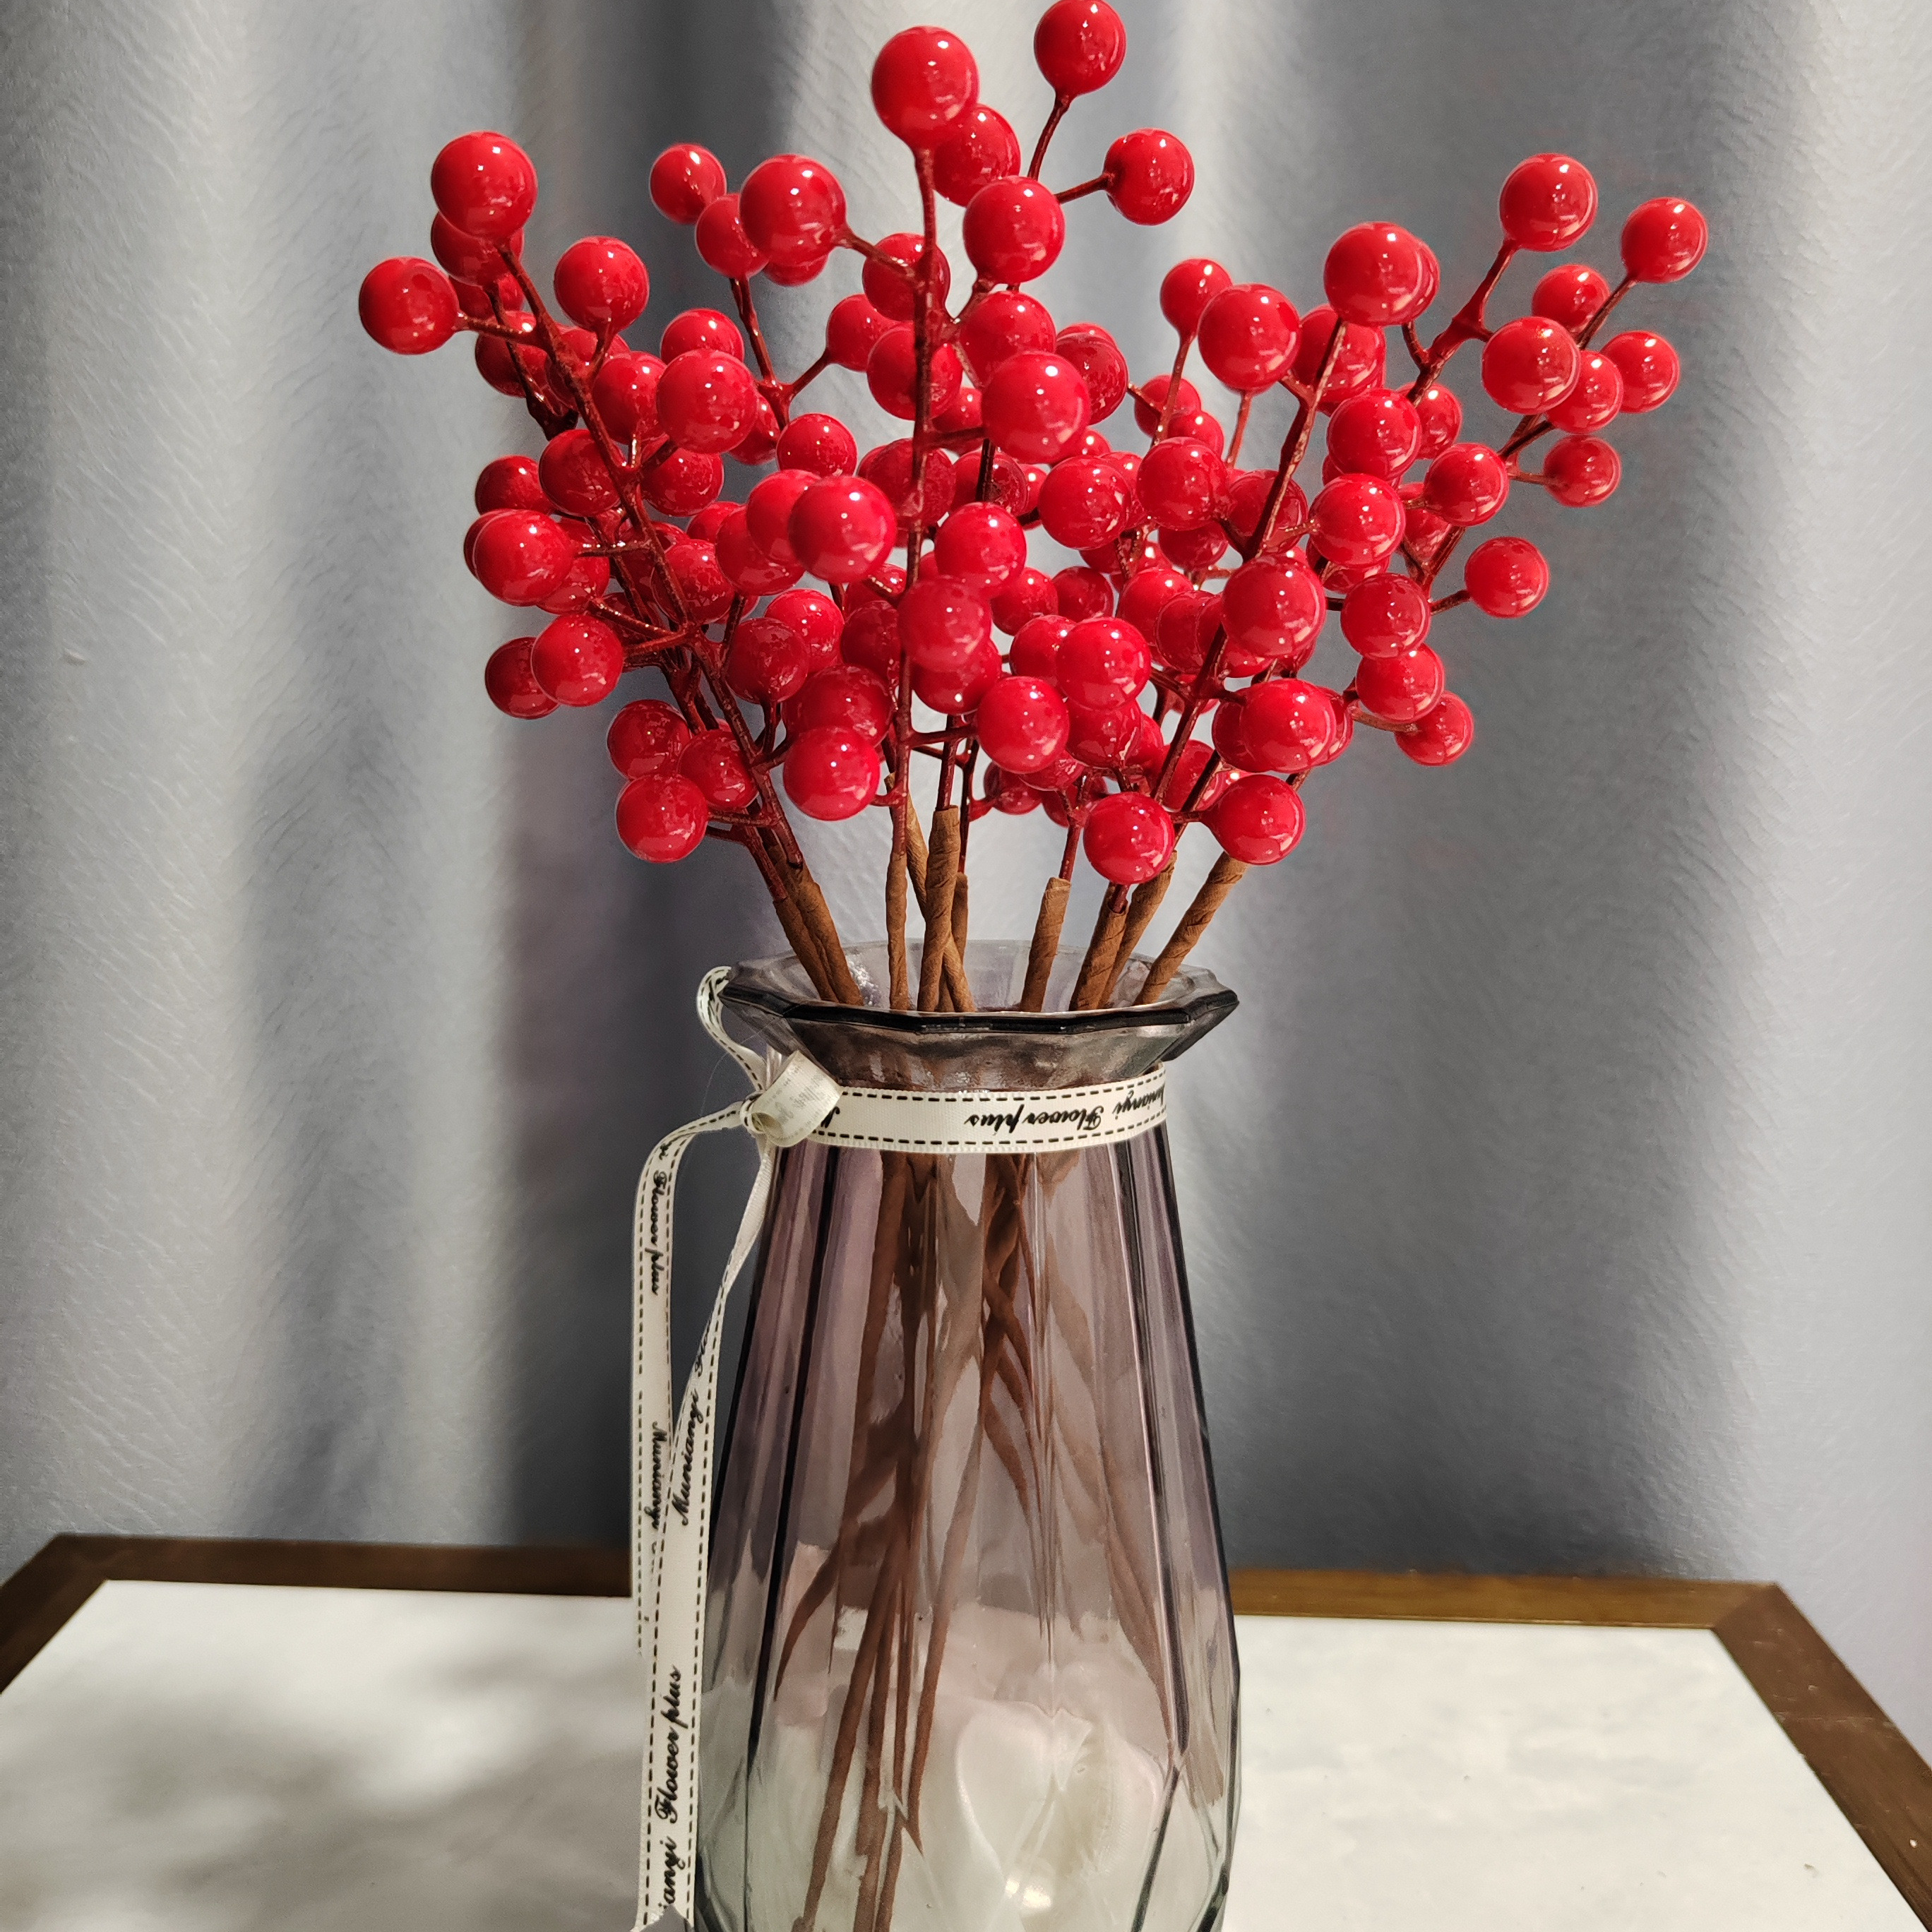 20pcs Berry Picks Artificial Red Berry Stems Red Christmas Tree Decorations  7.5 Inches For Christma Tree